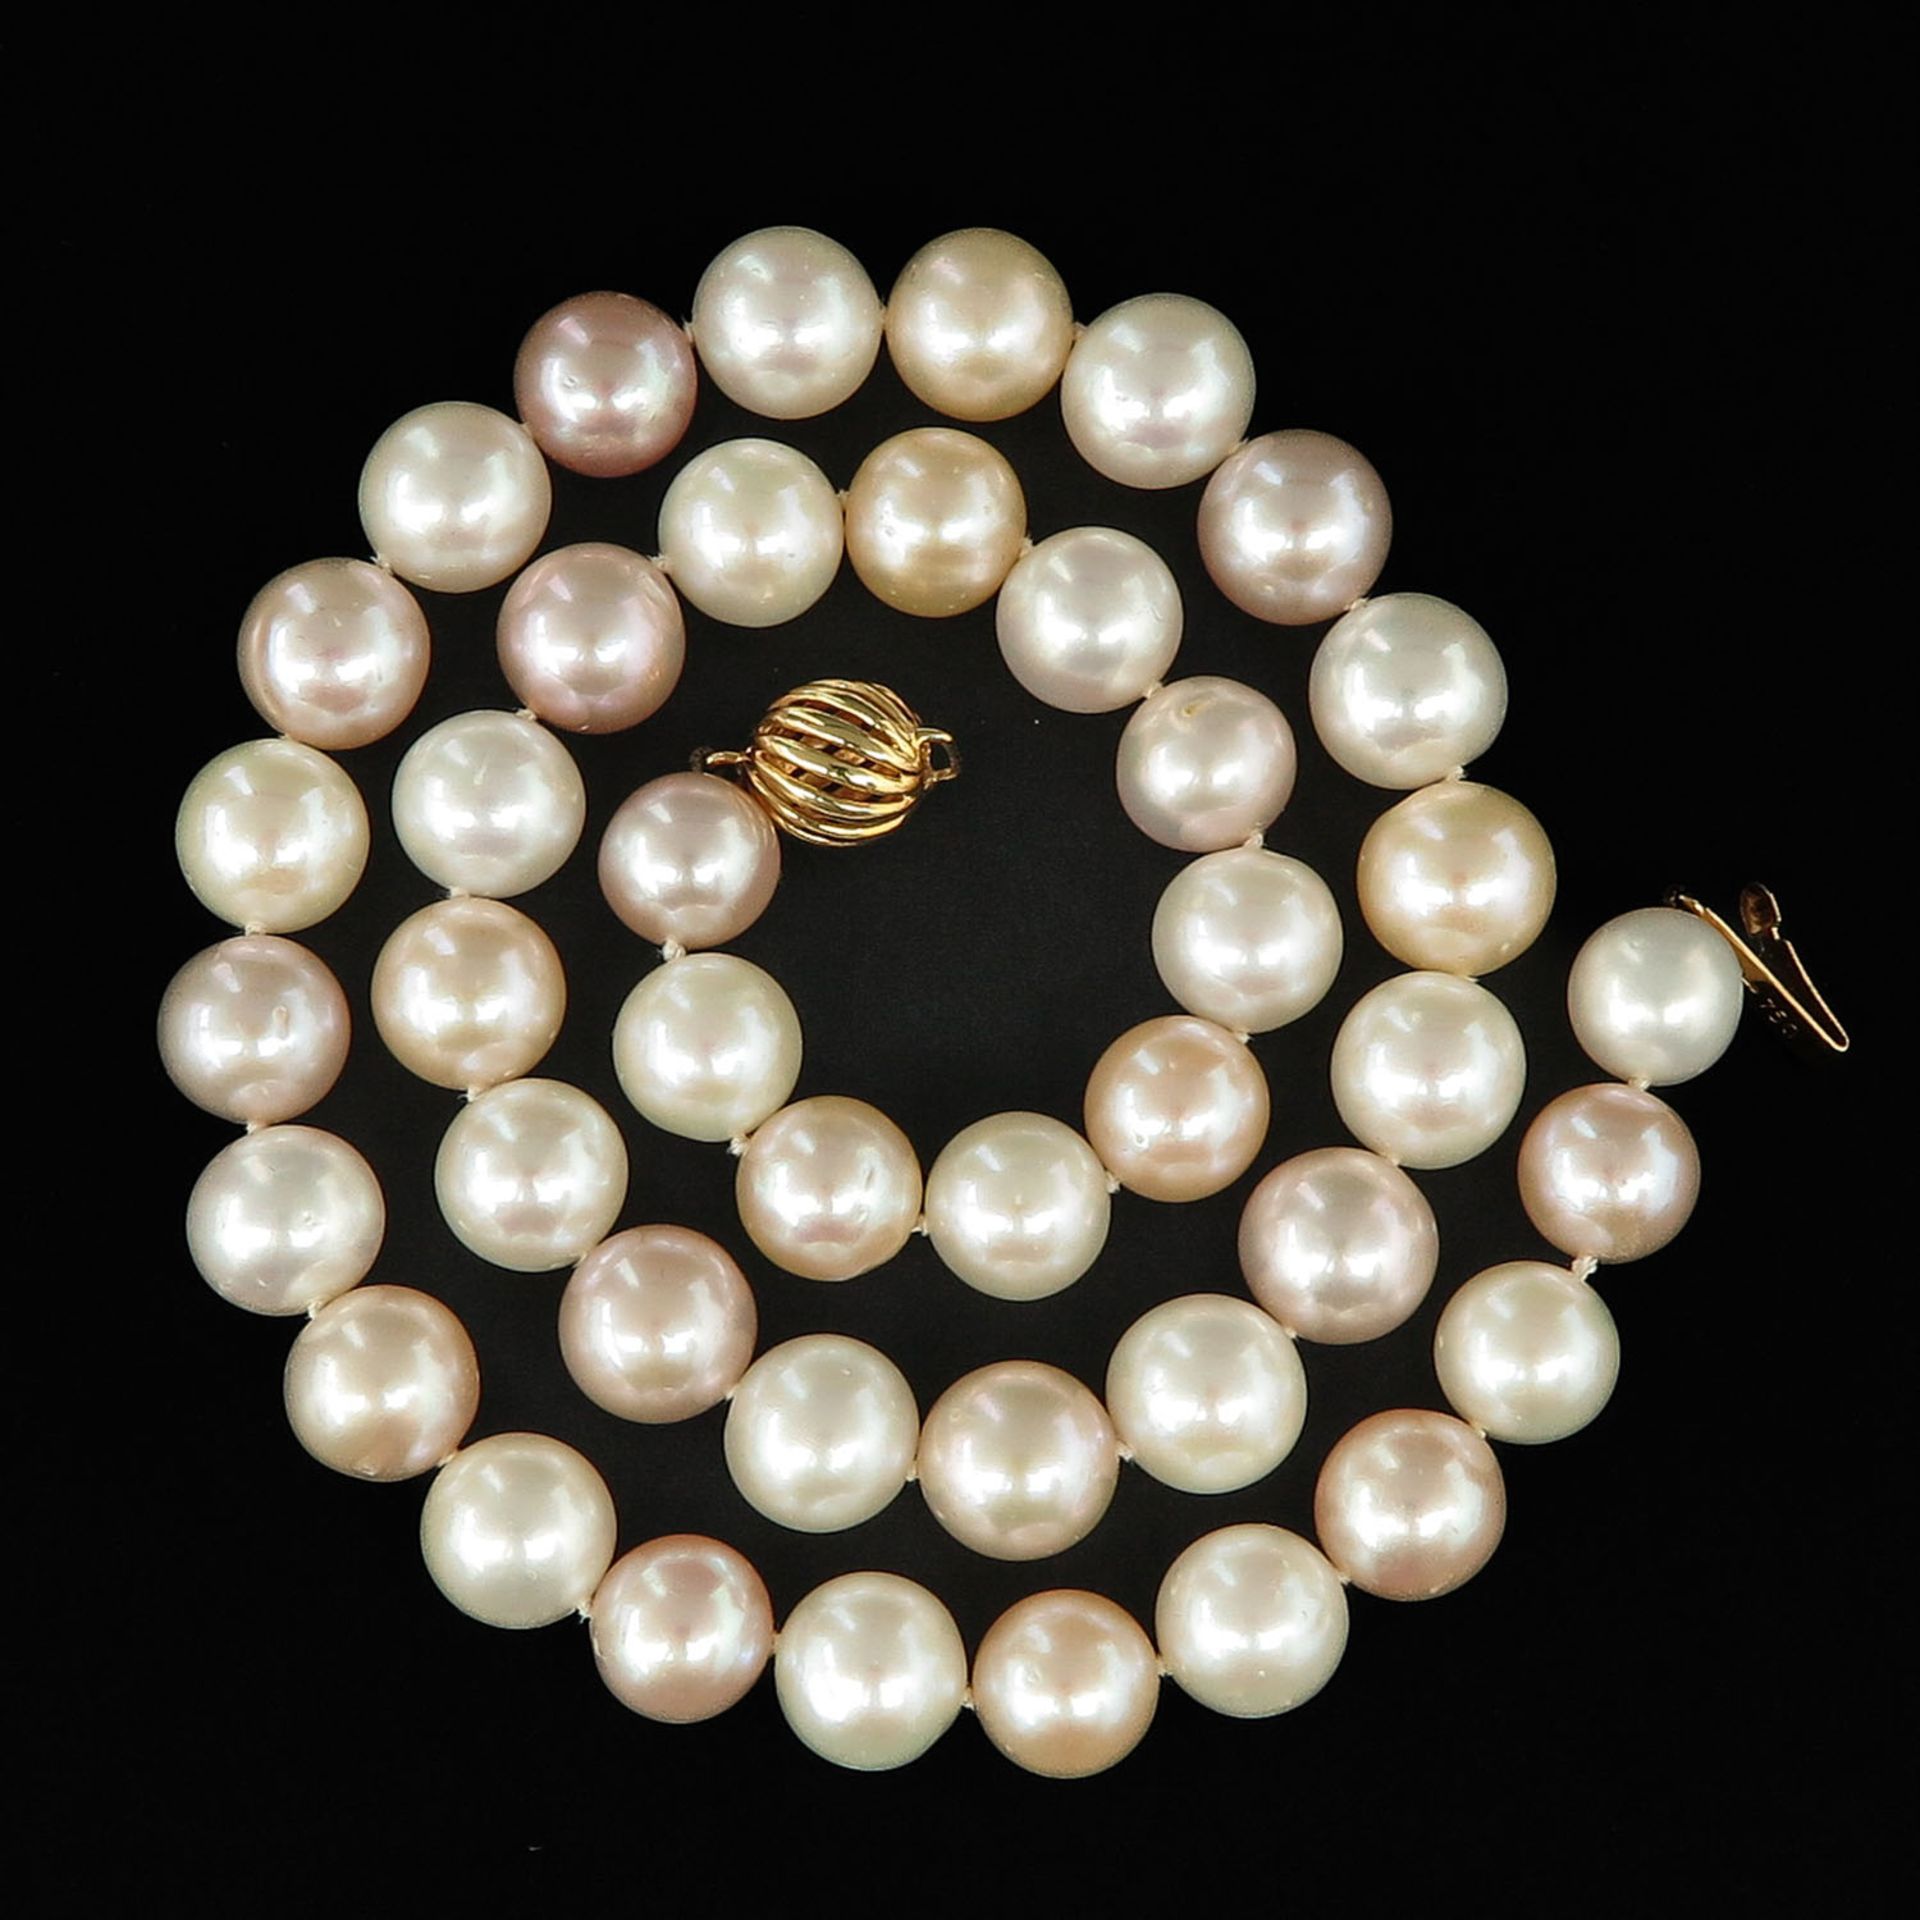 A Single Strand Pearl Necklace - Image 2 of 6